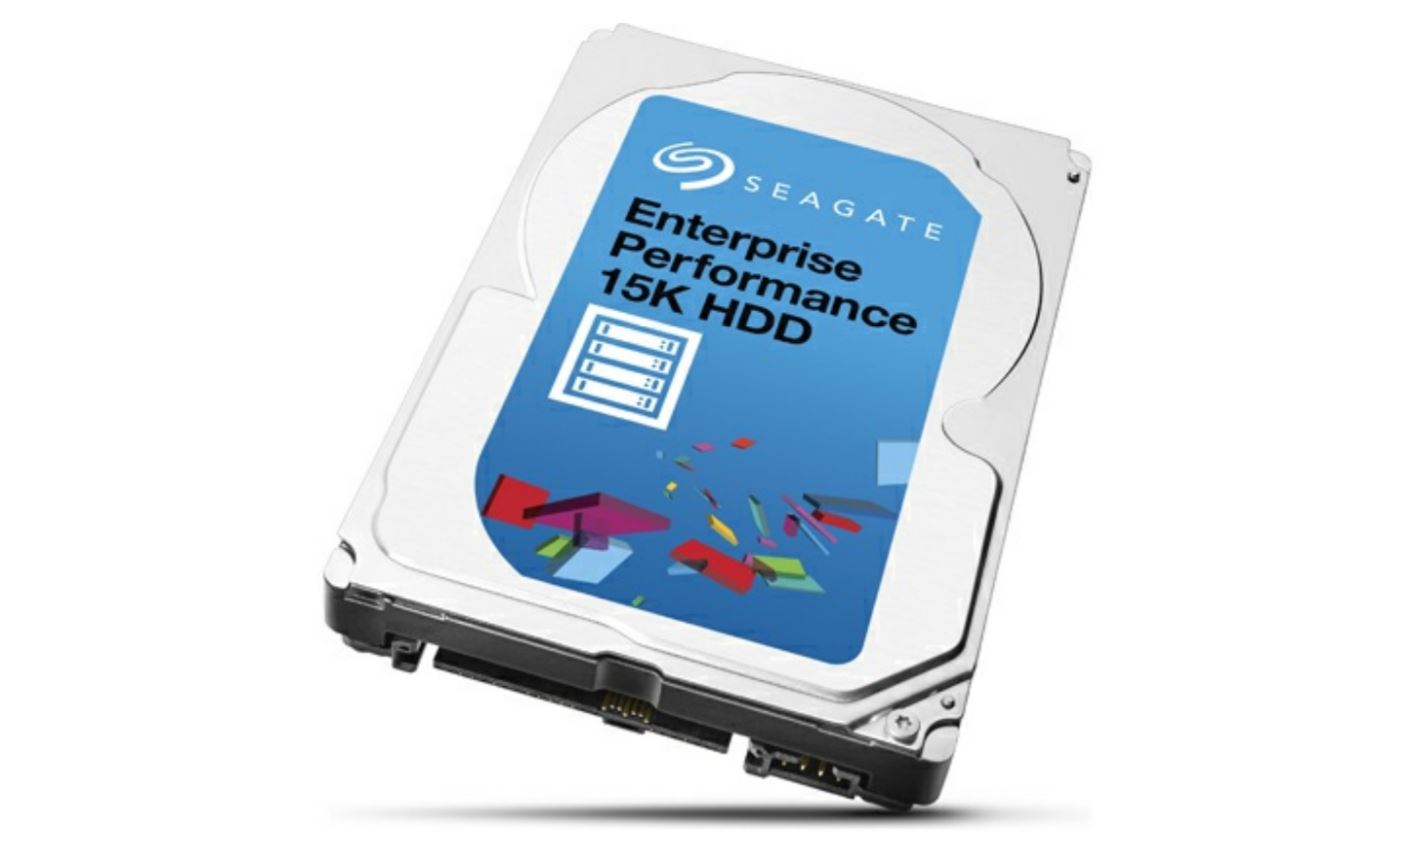 Seagate Launches the Final 15K rpm Drive: RIP HDDs